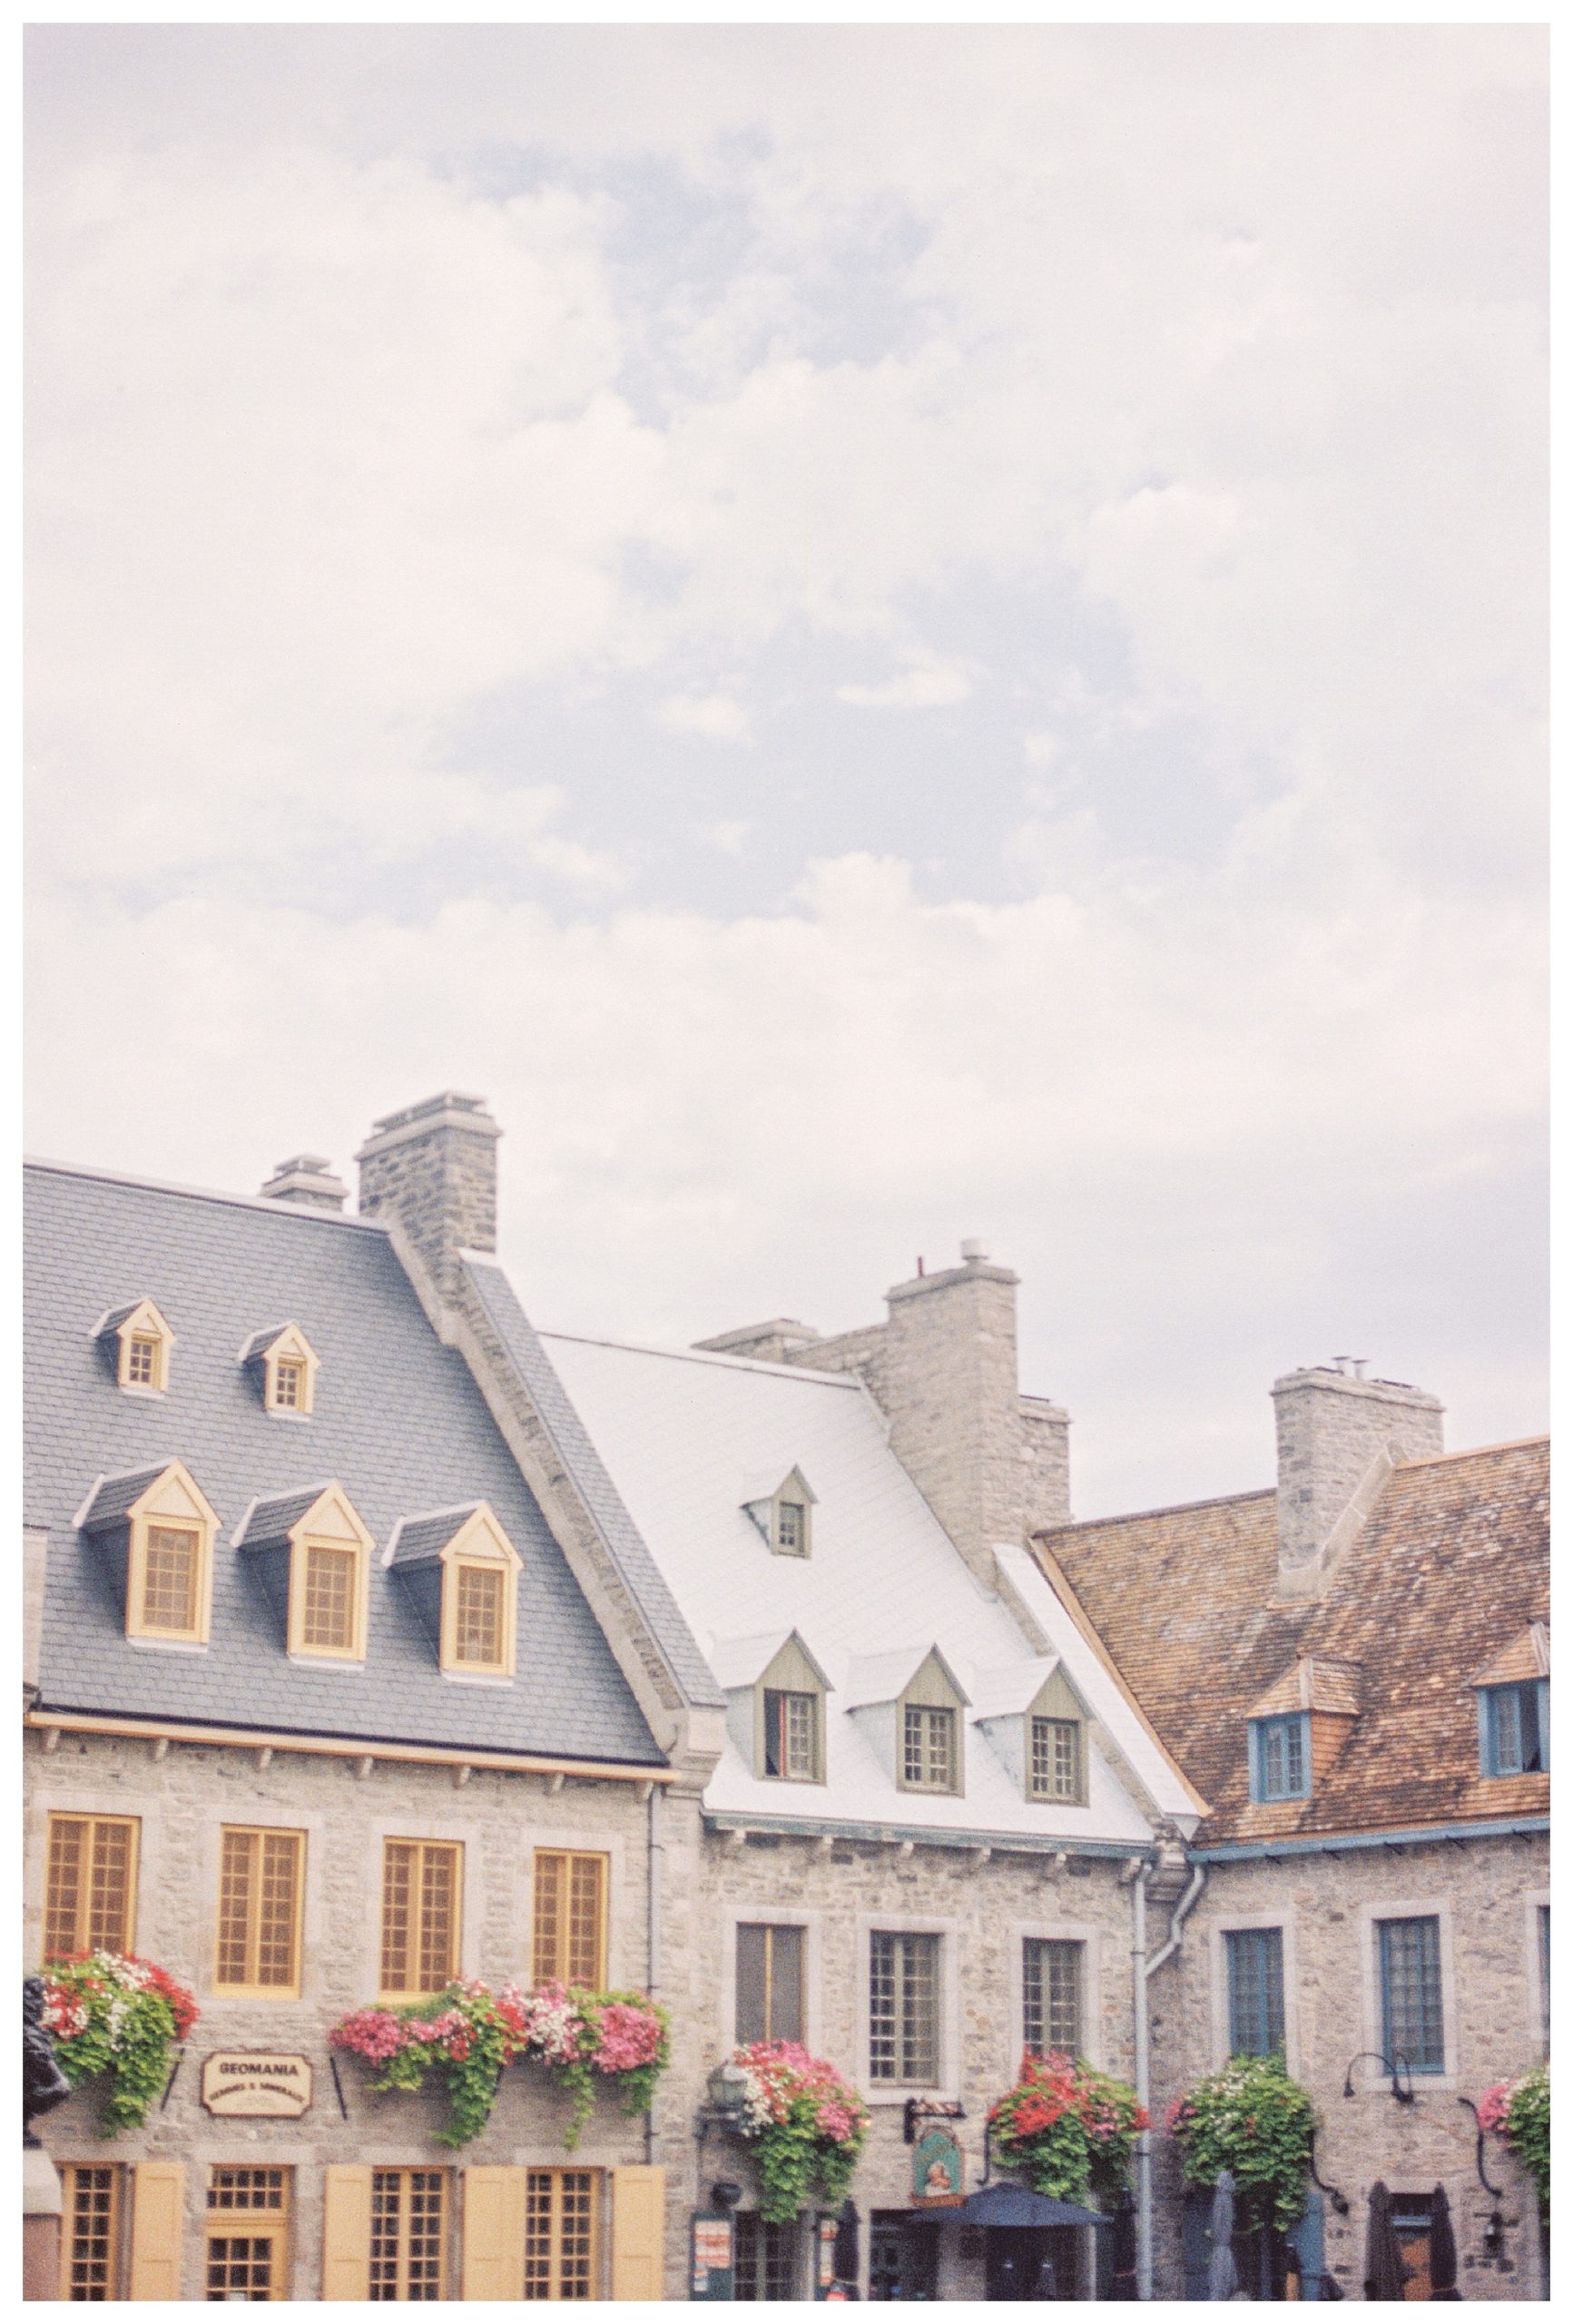 Roofs of stone buildings with floral window boxes in Quebec City